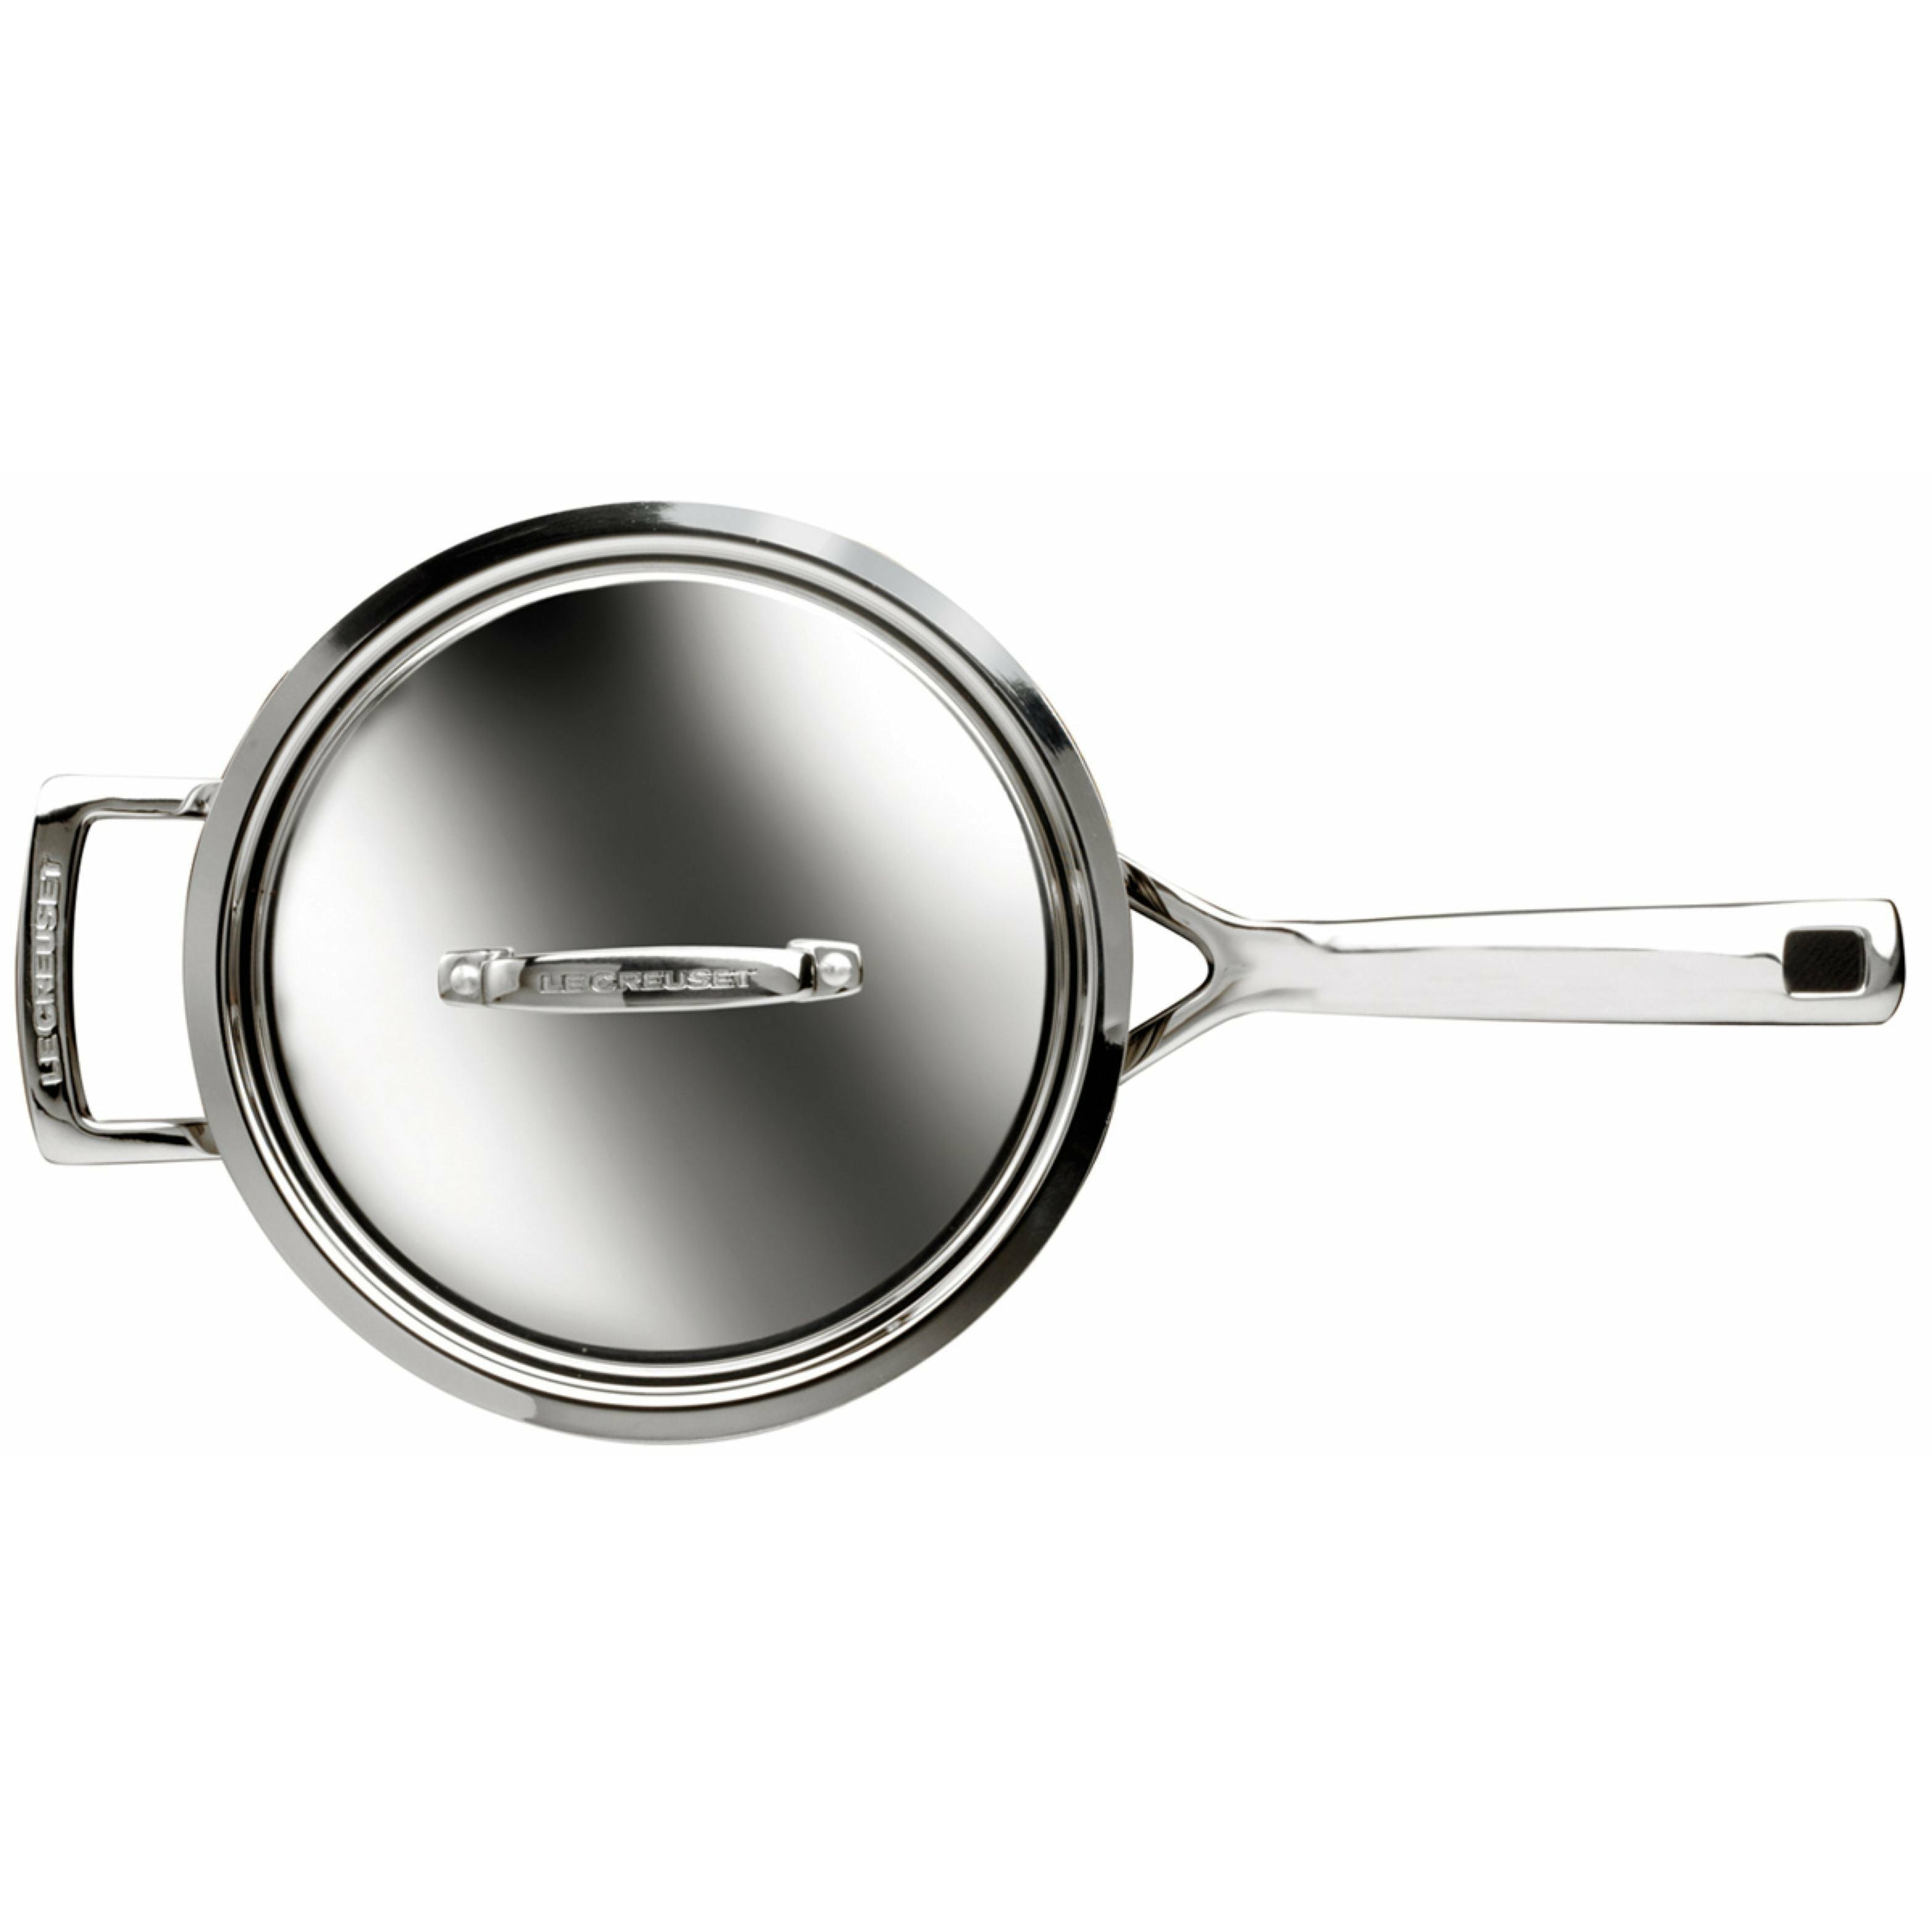 Le Creuset 3 Ply Stainless Steel Saucepan With Lid 3.8 L, 20 Cm